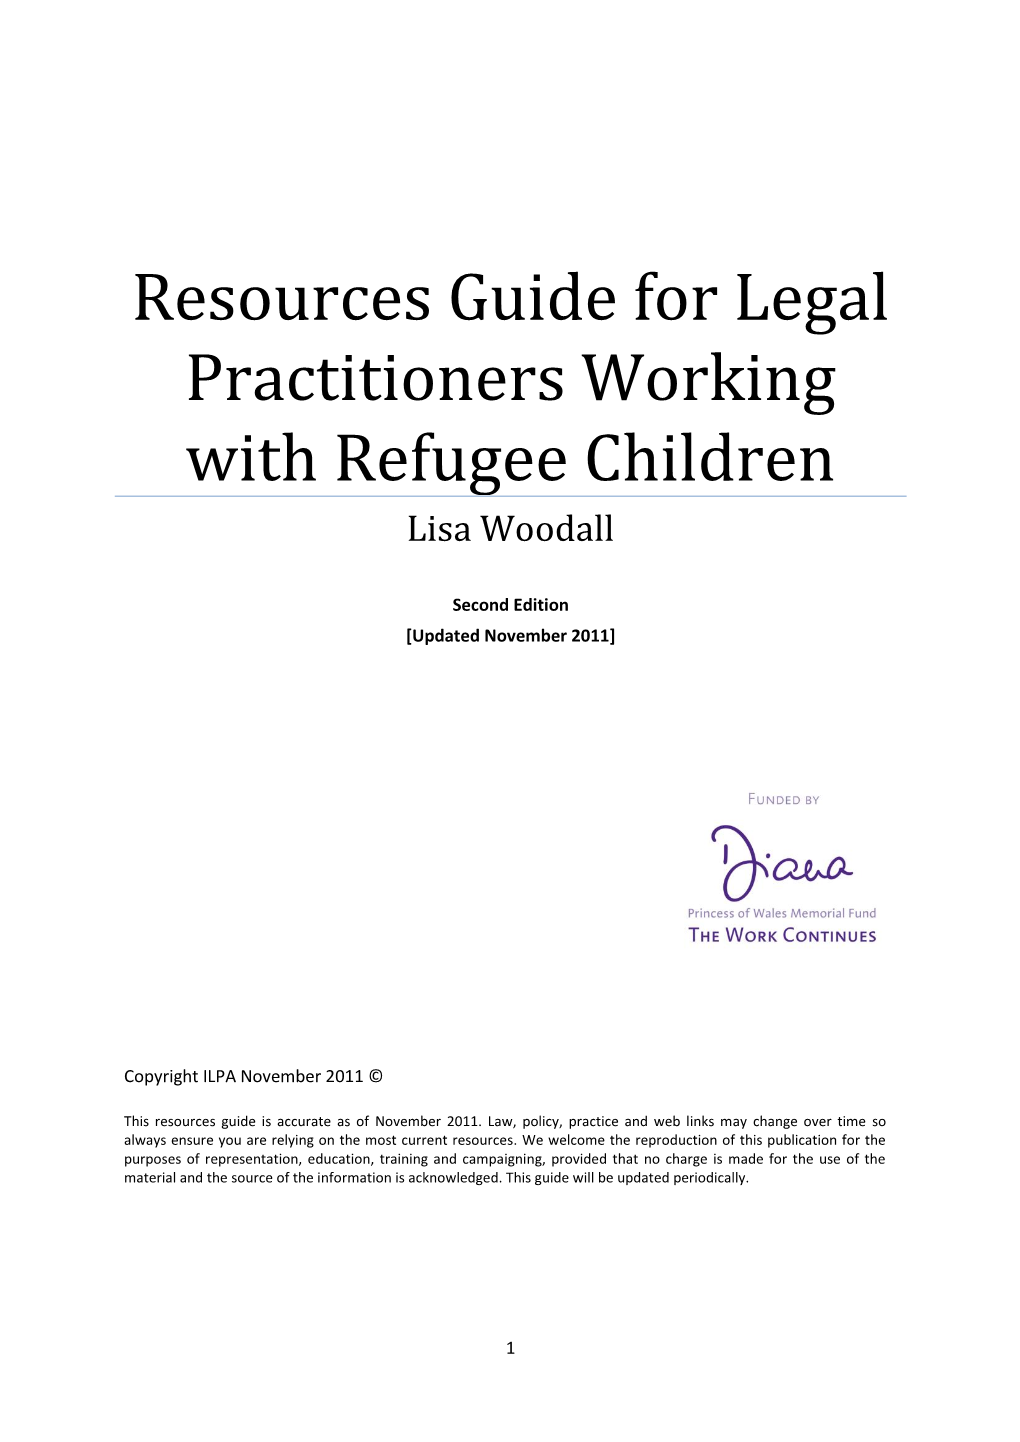 Resources Guide for Legal Practitioners Working with Refugee Children Lisa Woodall